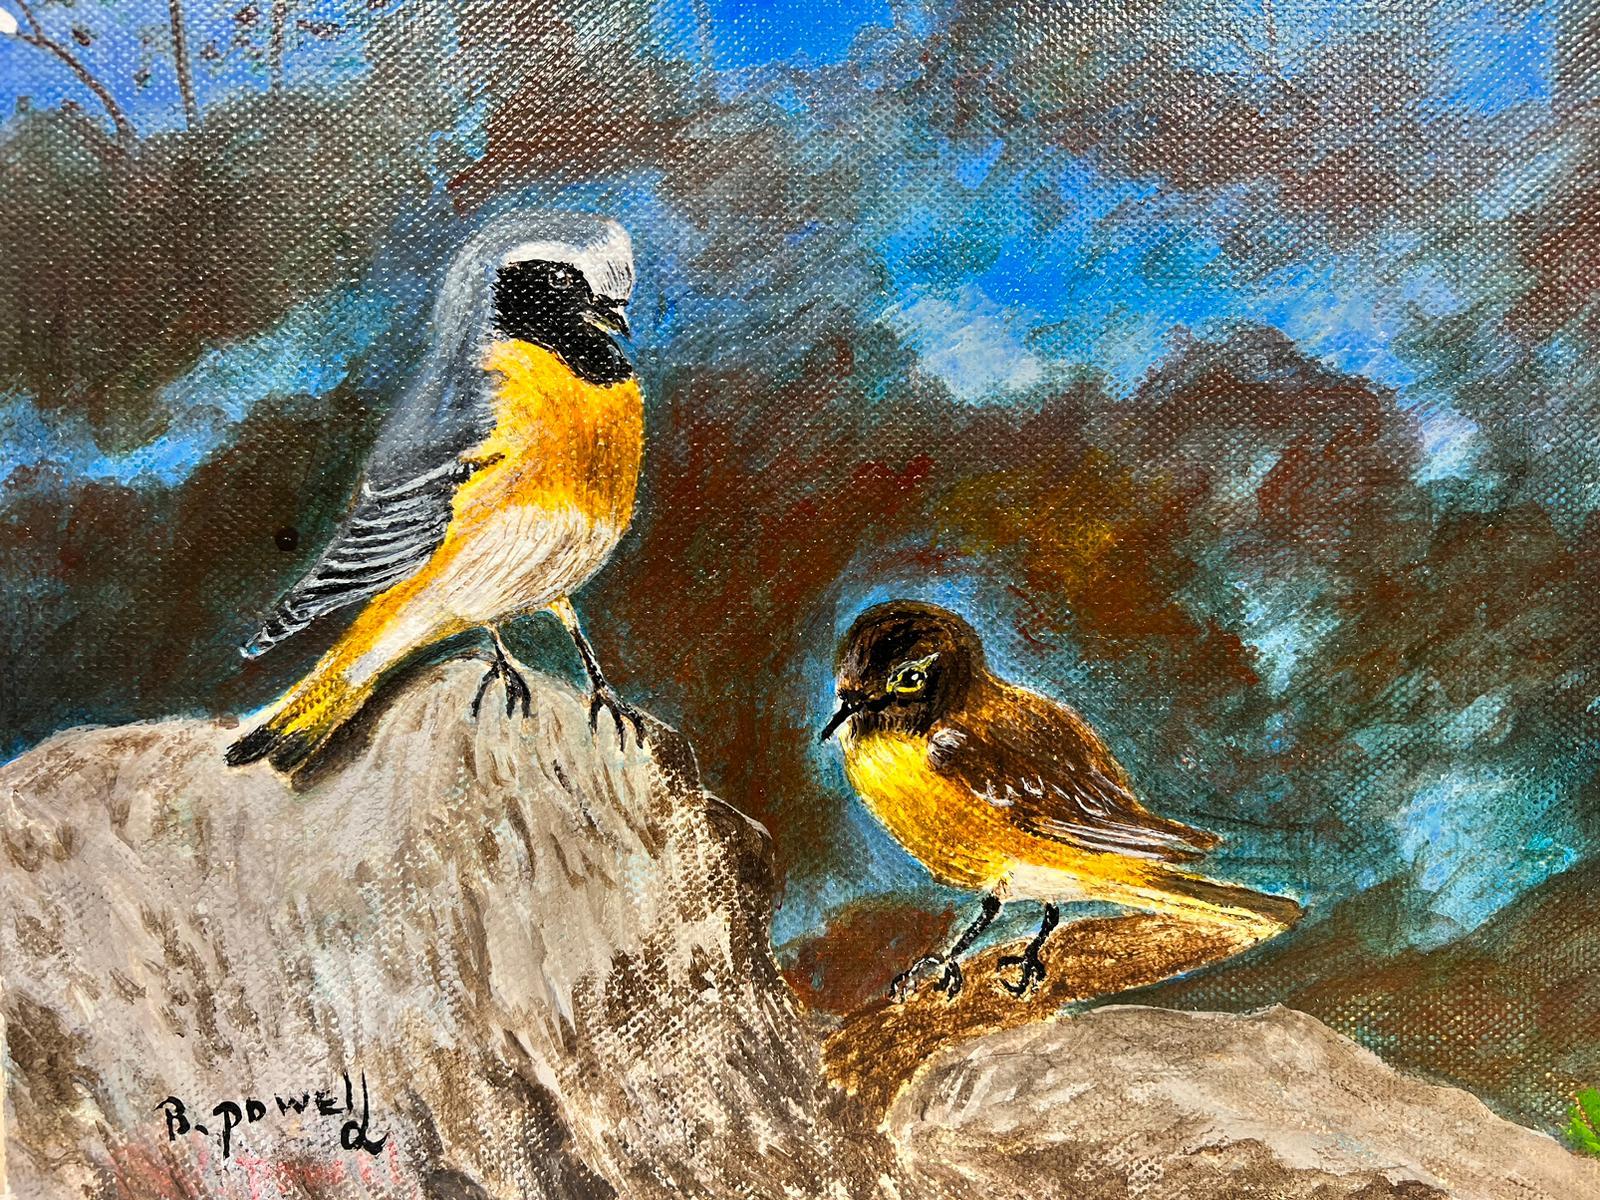 Pair of Birds
by Ben George Powell, British contemporary artist
signed
acrylic on canvas, unframed
canvas: 10 x 12 inches
provenance: private collection of this artists work, UK
The painting is in very good and presentable condition.
